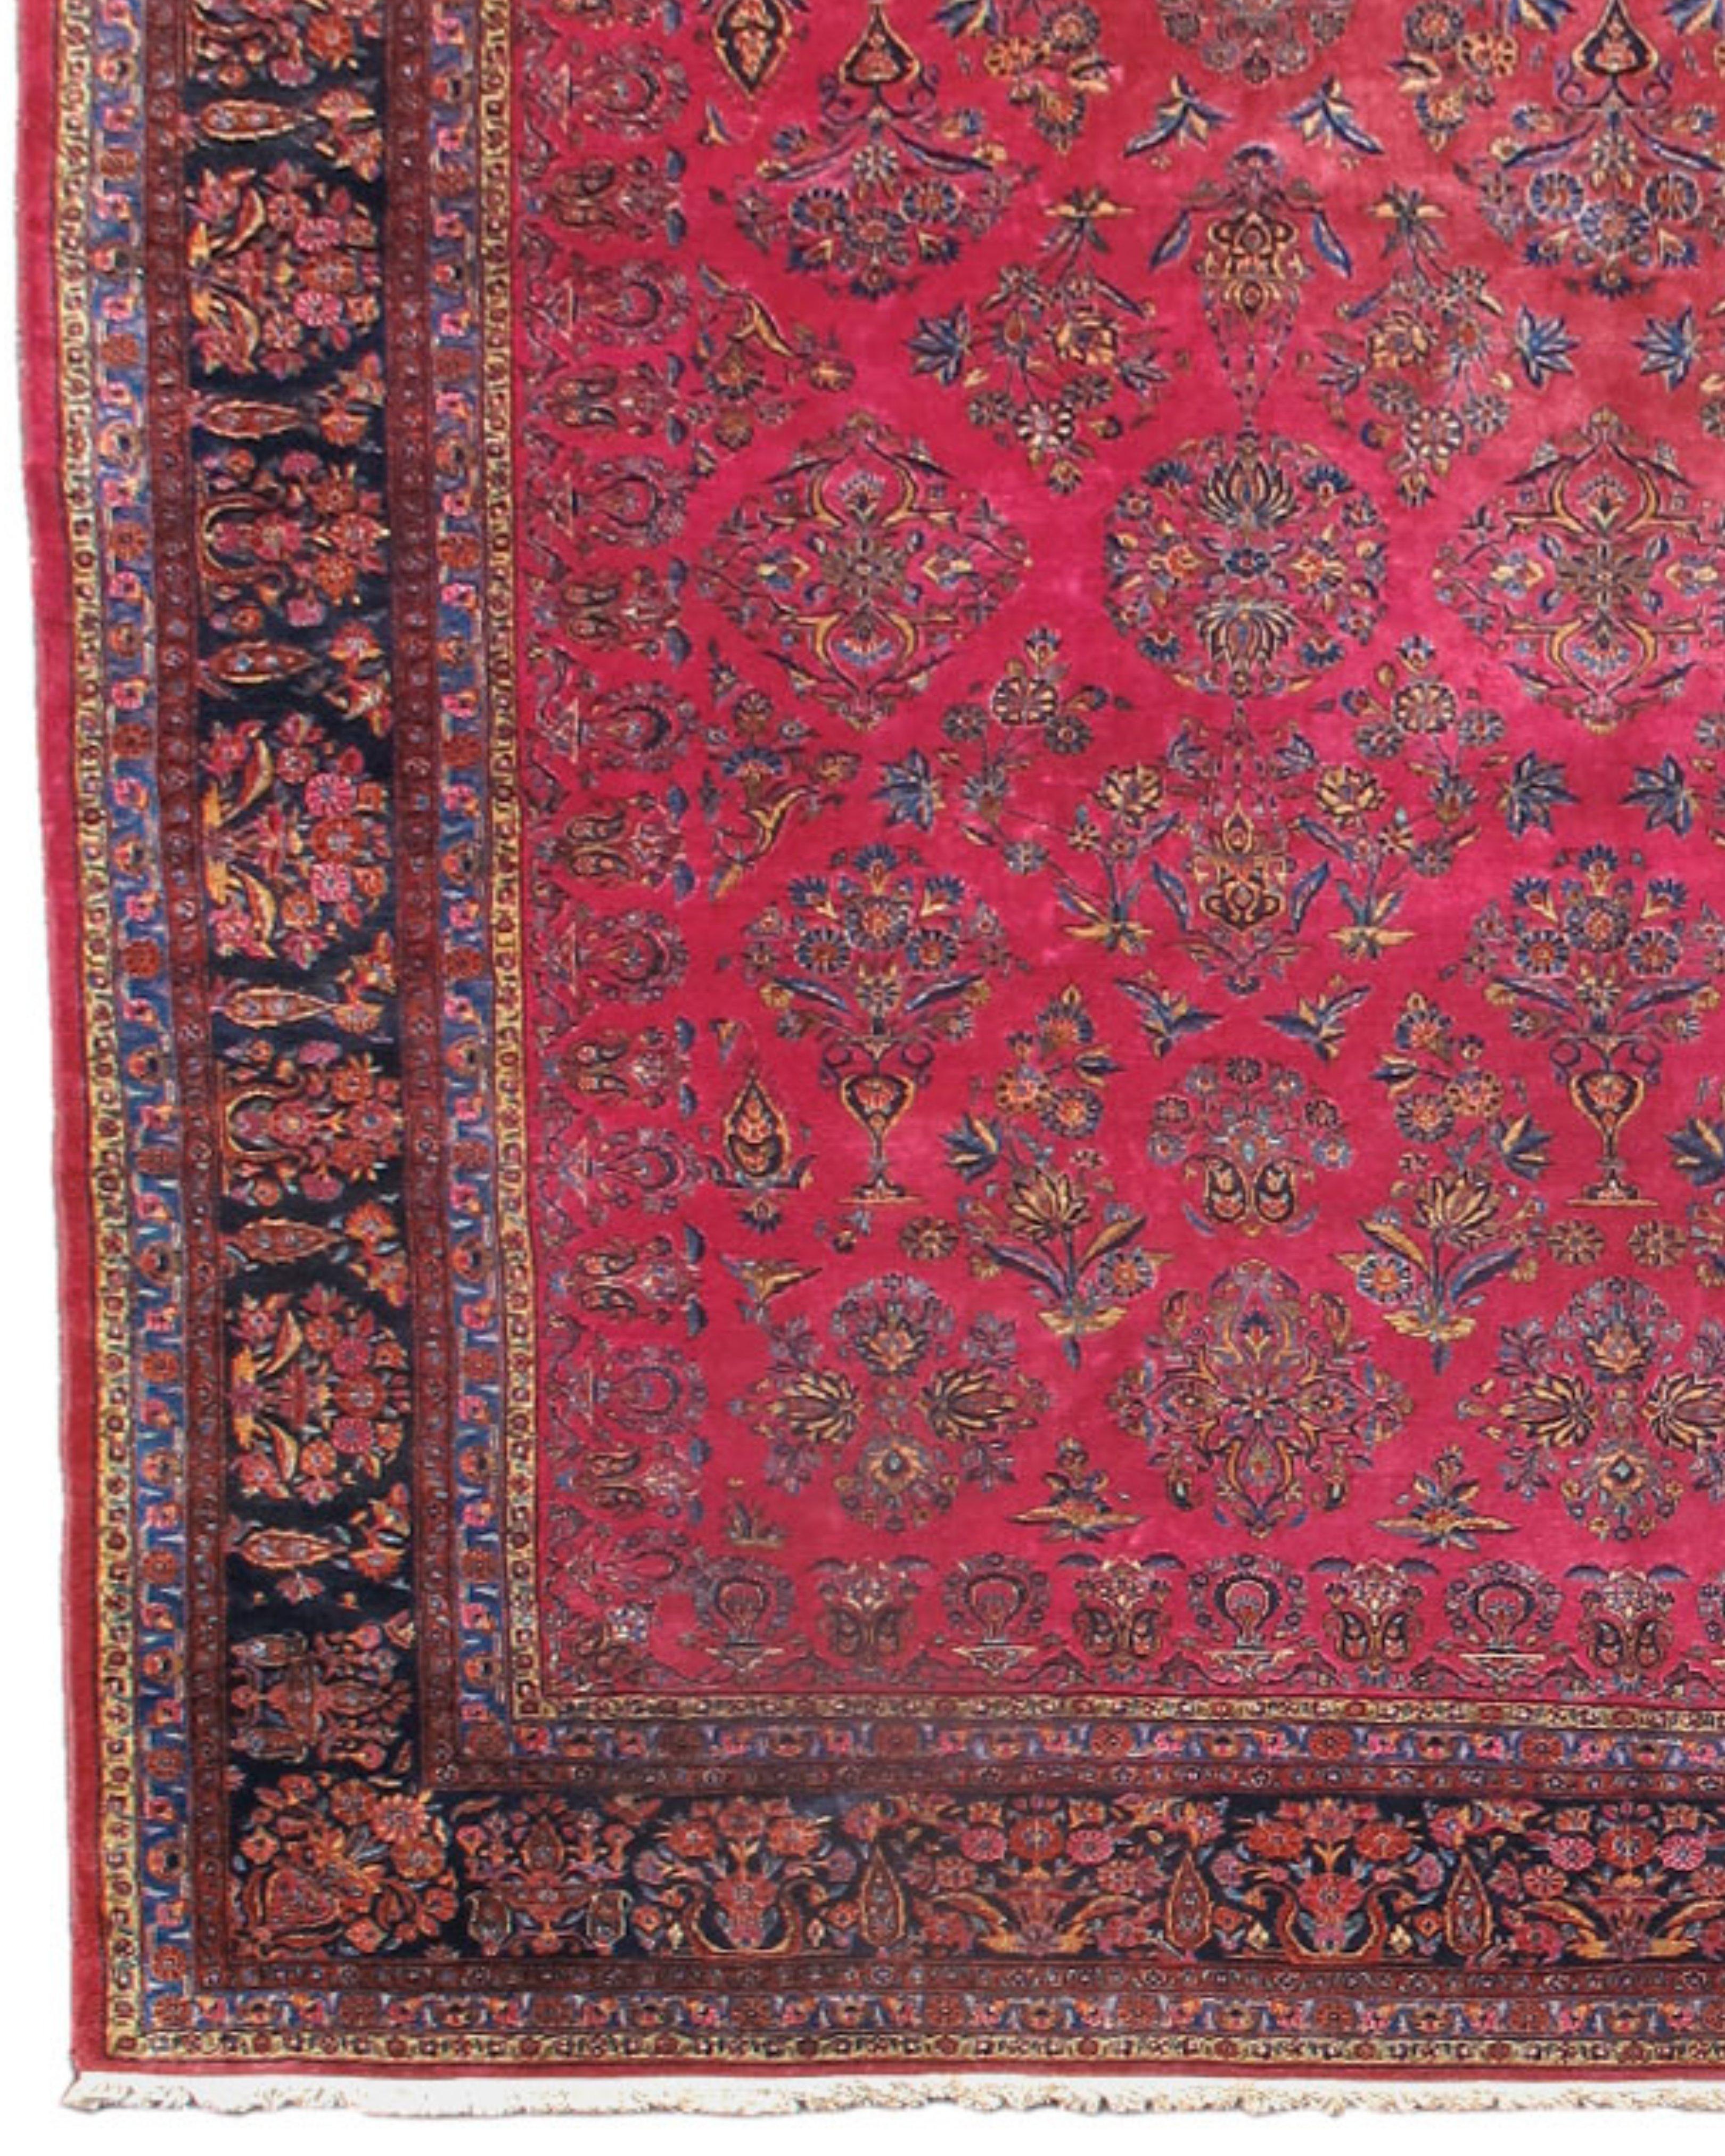 Large Antique Persian Kashan Carpet, c. 1930 In Excellent Condition For Sale In San Francisco, CA